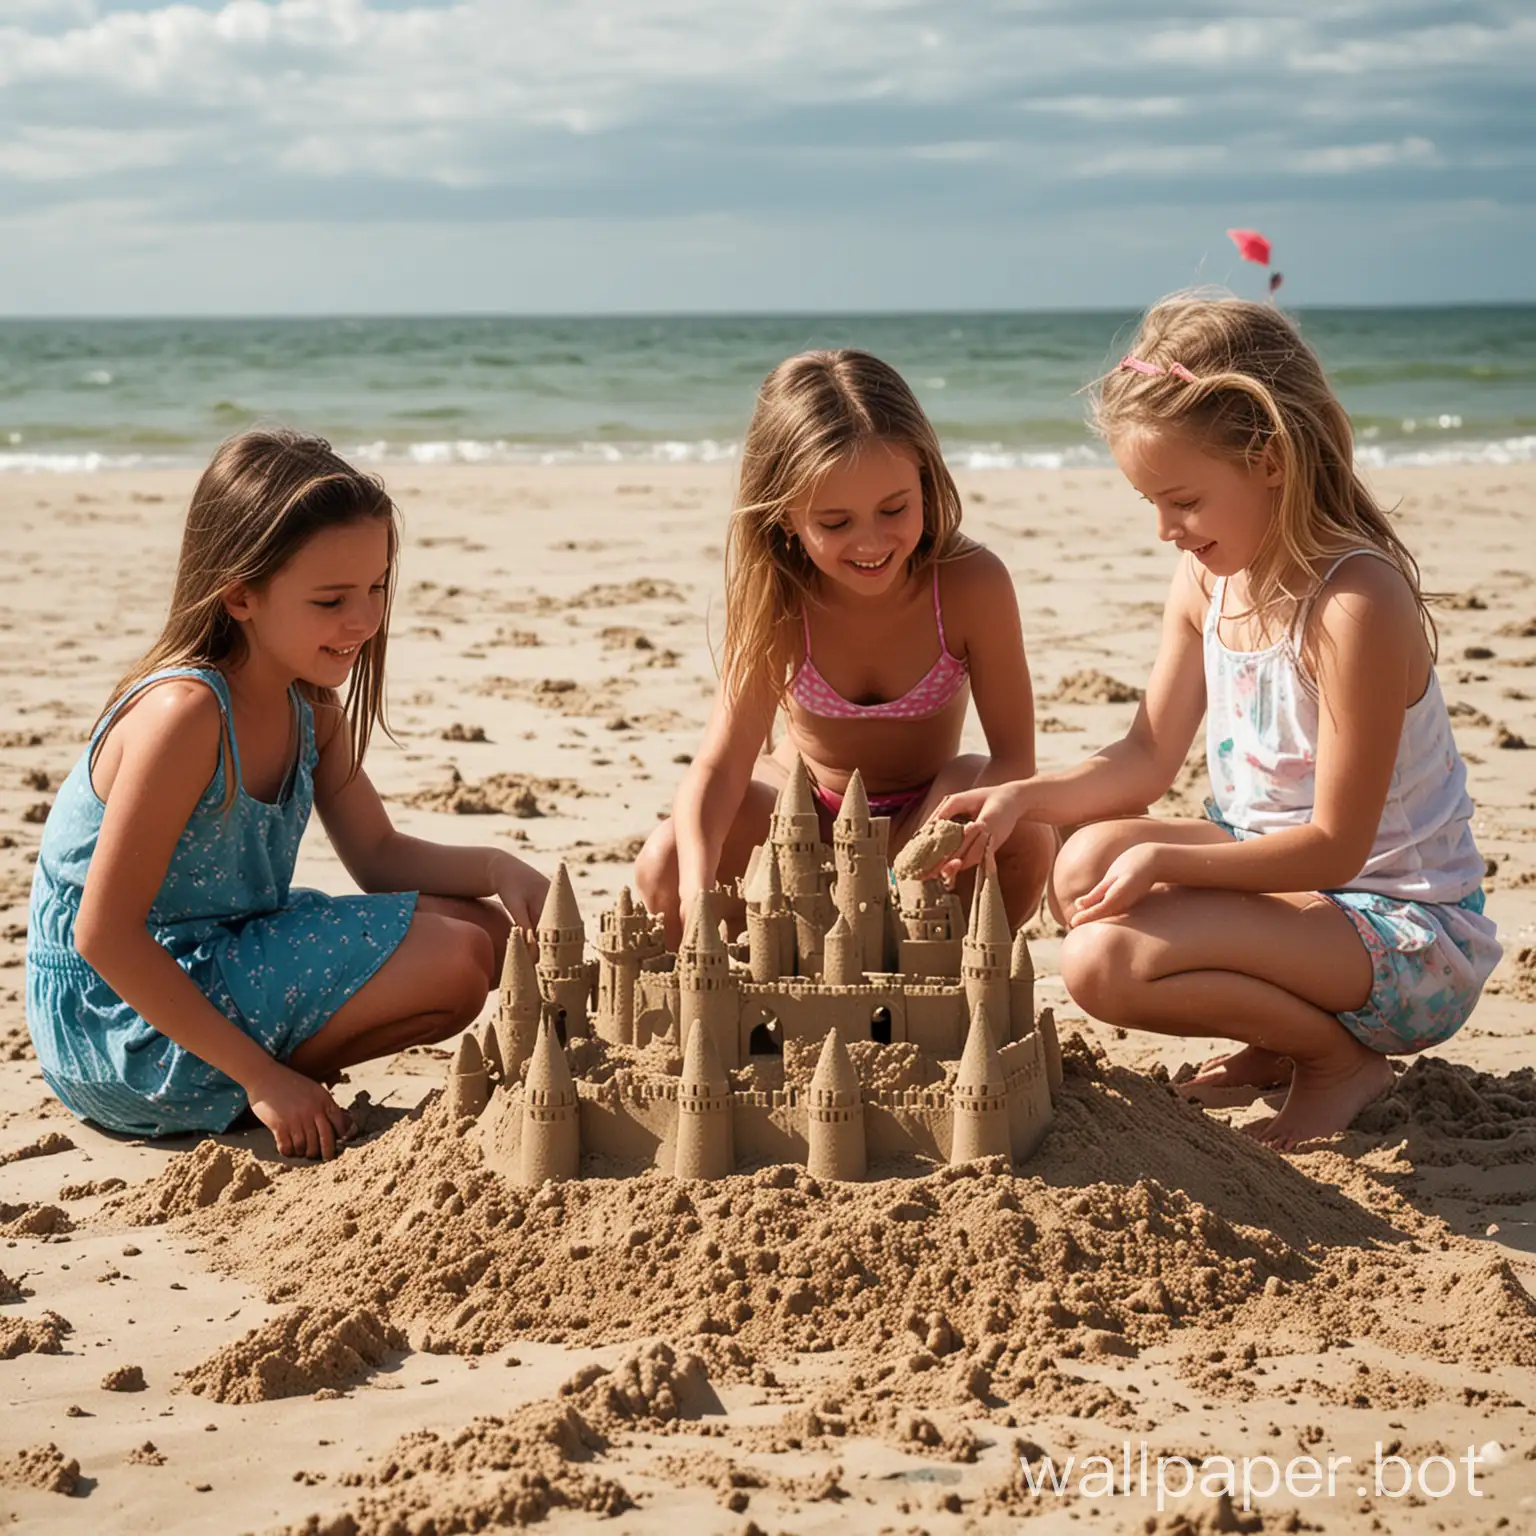 Girls on the beach playing building sand castles.